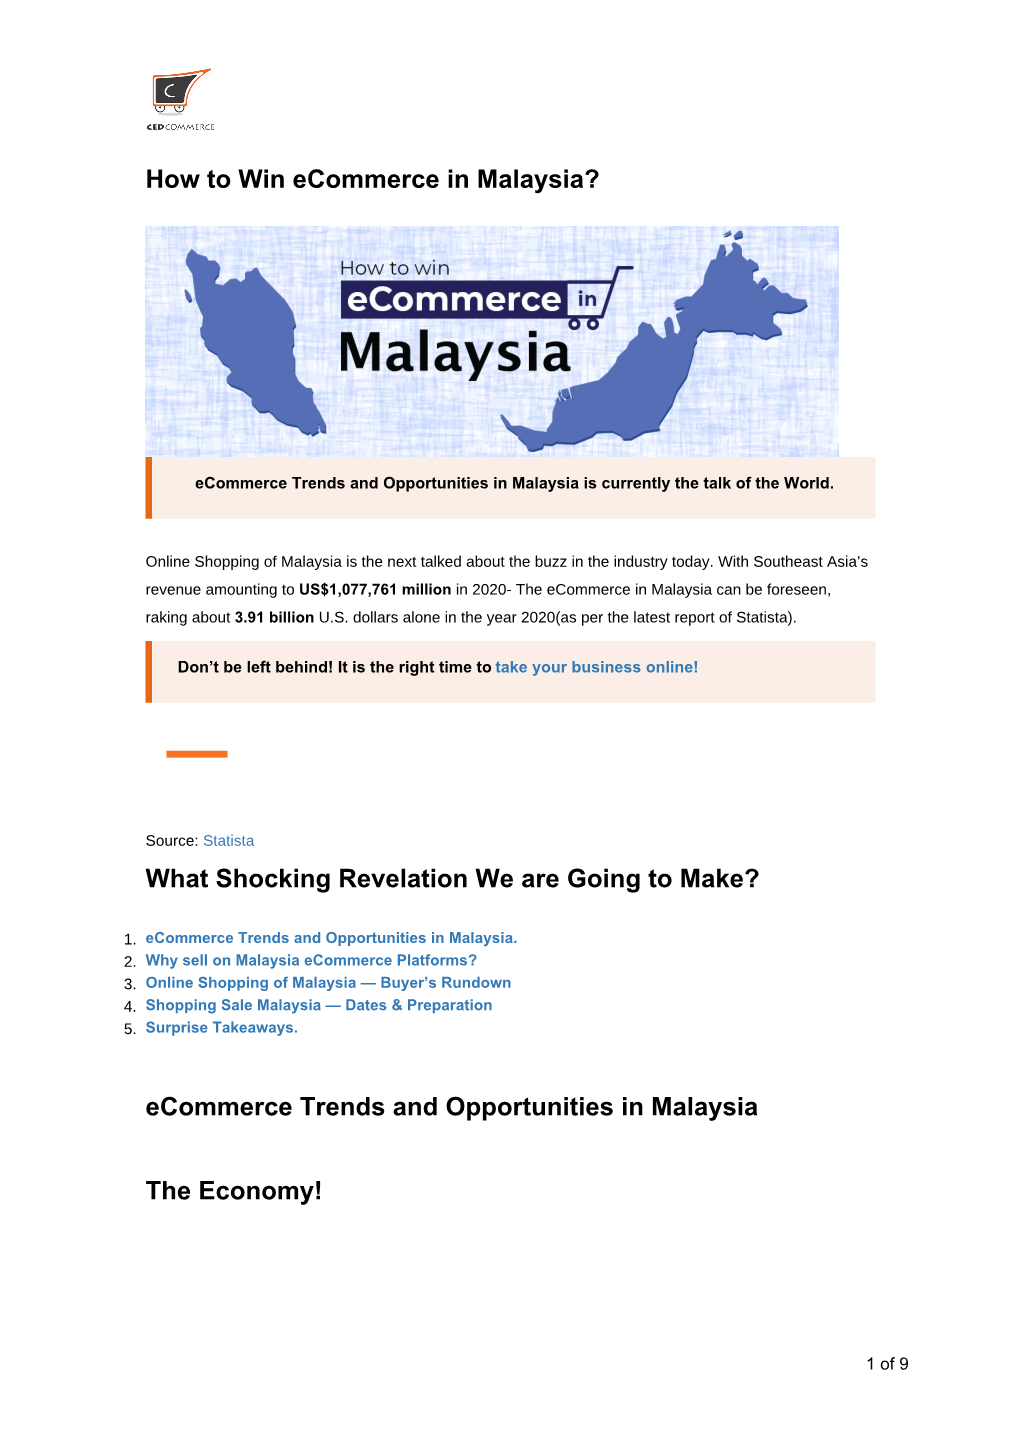 How to Win Ecommerce in Malaysia?